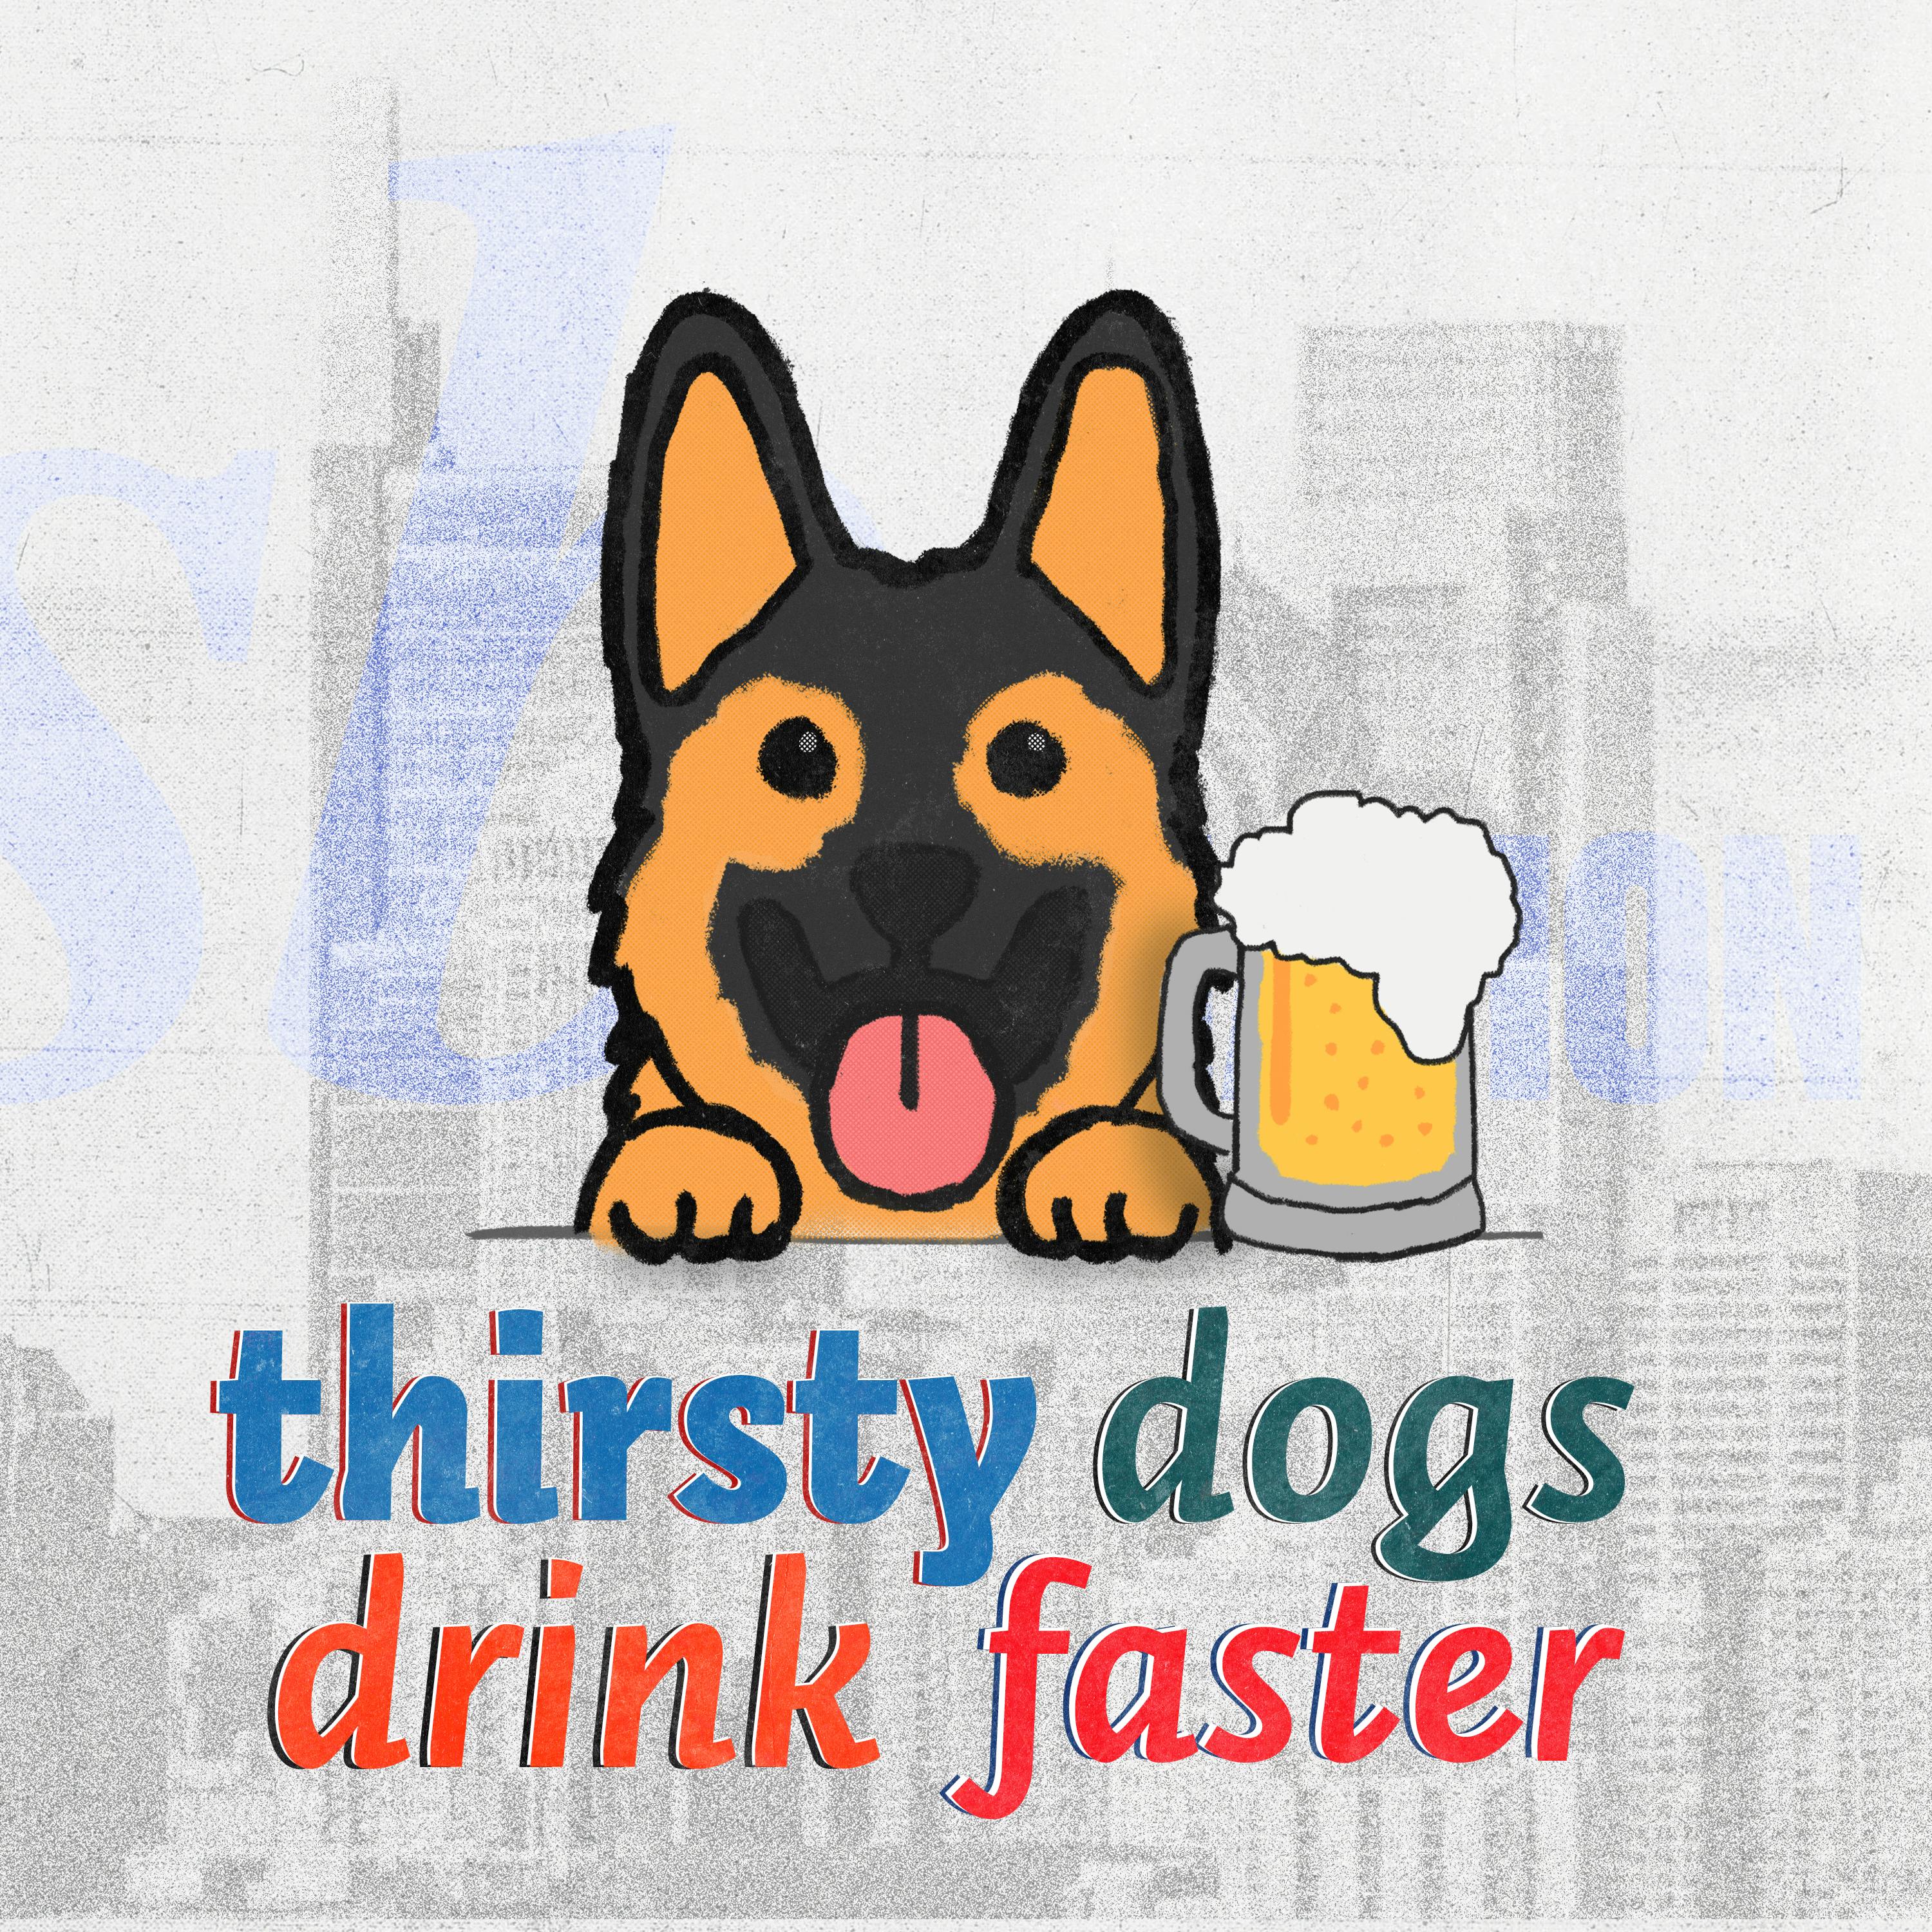 How was the atmosphere for the Ben Simmons' first game against the Sixers? Thirsty Dogs Drink Faster podcast with Paul Hudrick and Shamus Clancy